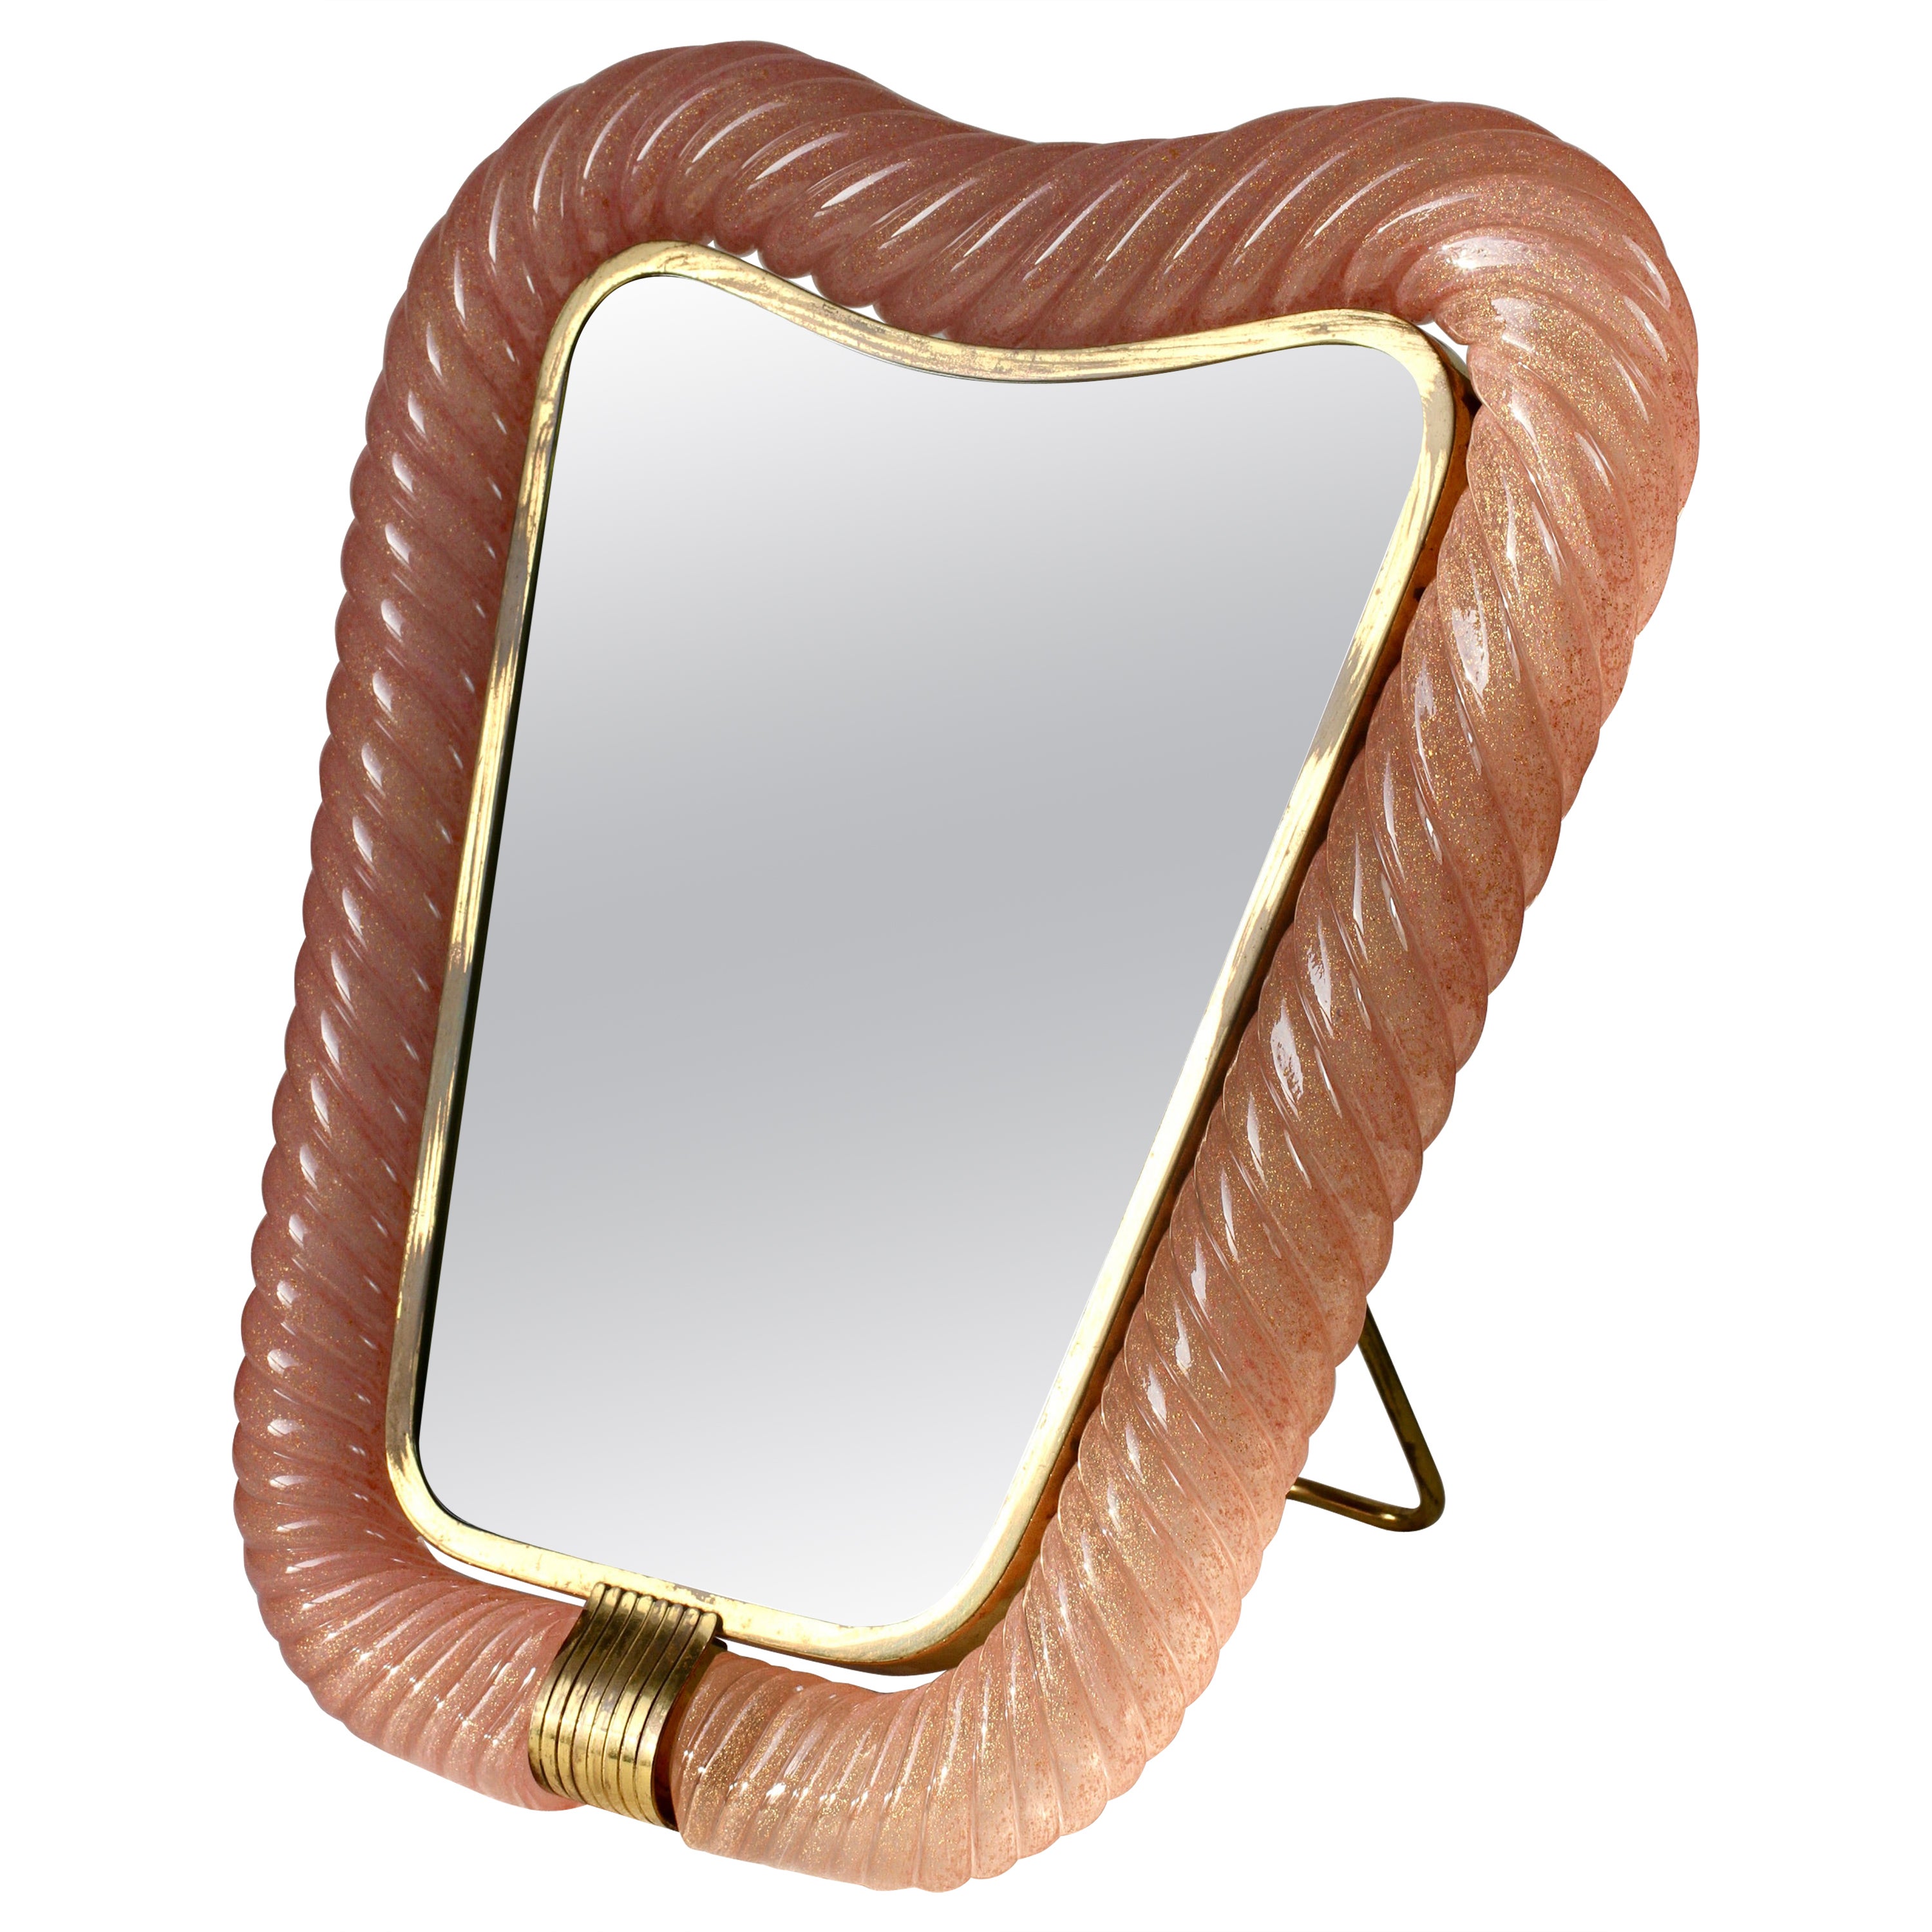 Rare Large Signed Ercole Barovier Pink Murano Glass & Brass Vanity Mirror 1940s For Sale